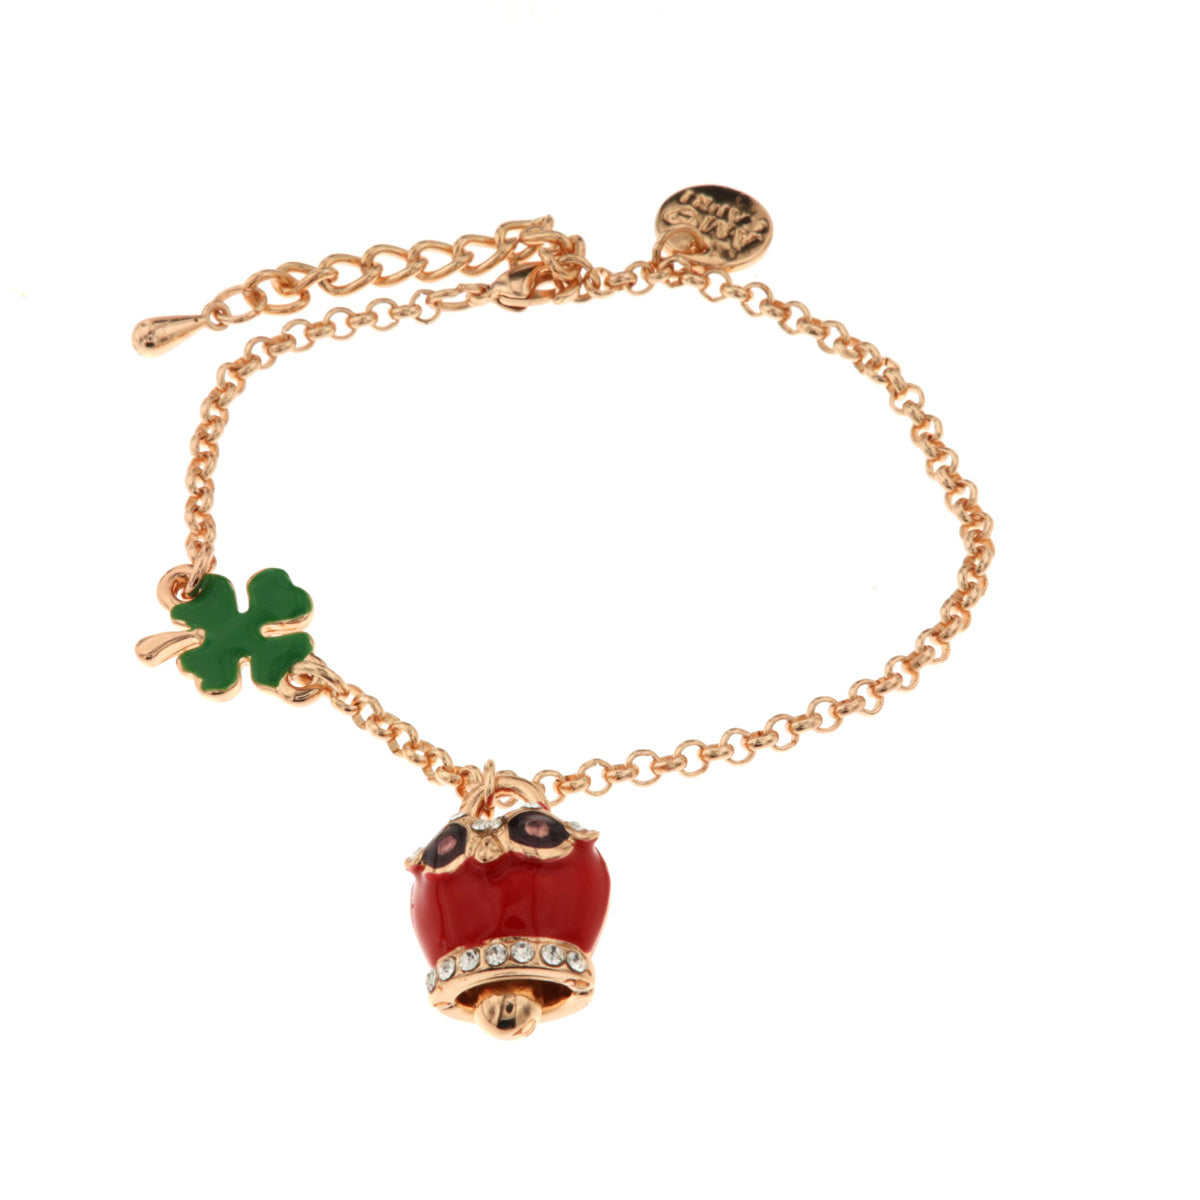 Metal bracelet with four -leaf clover and owl charming bell with red nail polish and white crystals